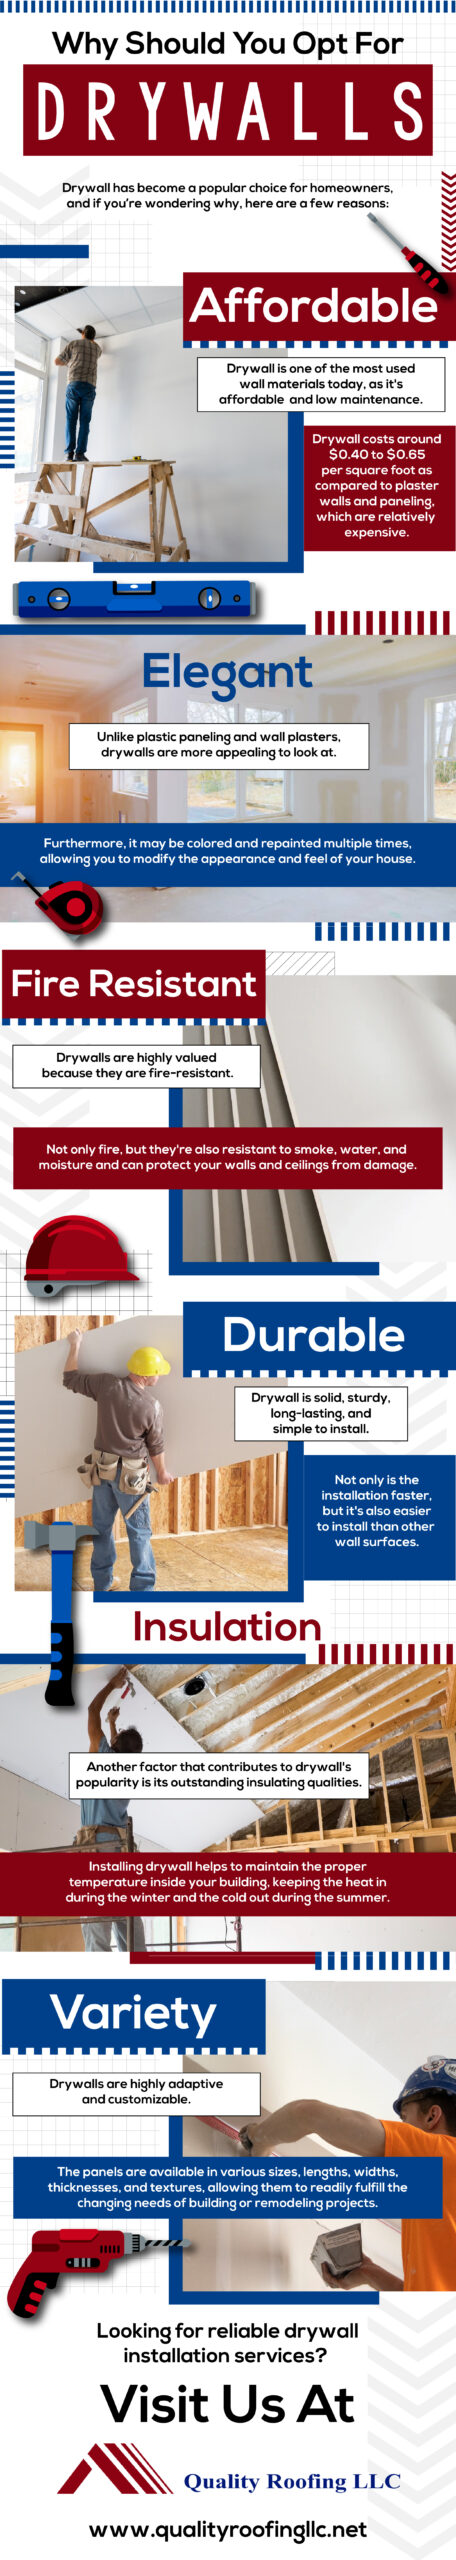 Why Should You Opt For Drywalls - Infograph